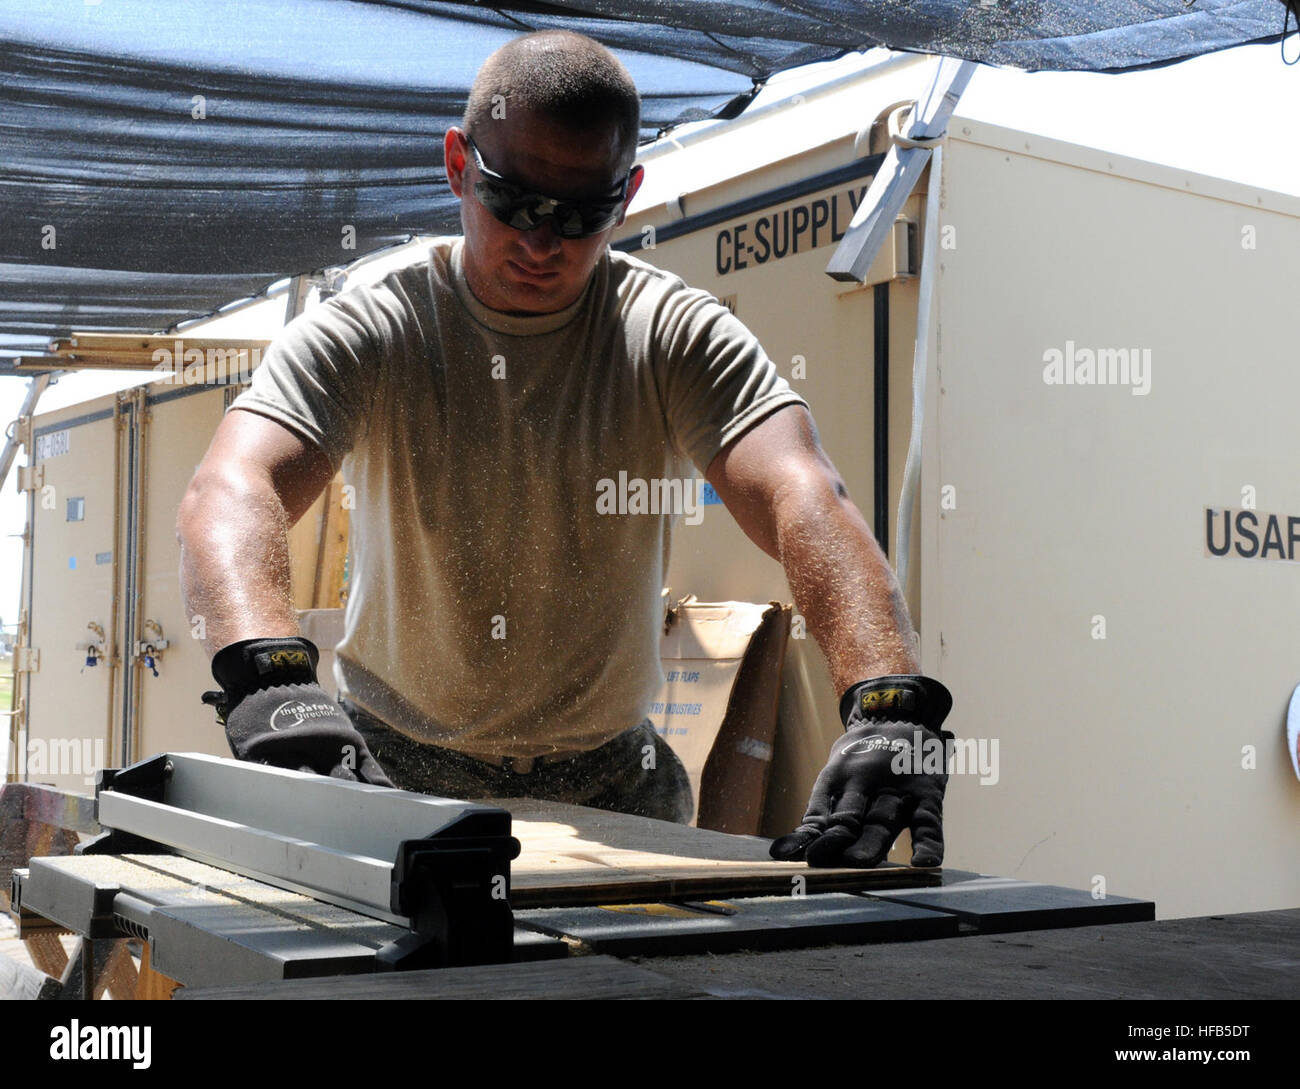 GUANTANAMO BAY, Cuba – Air Force Staff Sgt. Gary Learmonth, of the 474th Expeditionary Civil Engineering Squadron, Base Emergency Engineer Force, Joint Task Force Guantanamo, measures a piece of plywood before sawing it in Camp Justice, March 16, 2010. The 474th ECES maintains the Expeditionary Legal Complex, vital to the JTF mission. JTF Guantanamo conducts safe, humane, legal and transparent care and custody of detainees, including those convicted by military commission and those ordered released by a court. The JTF conducts intelligence collection, analysis and dissemination for the protect Stock Photo